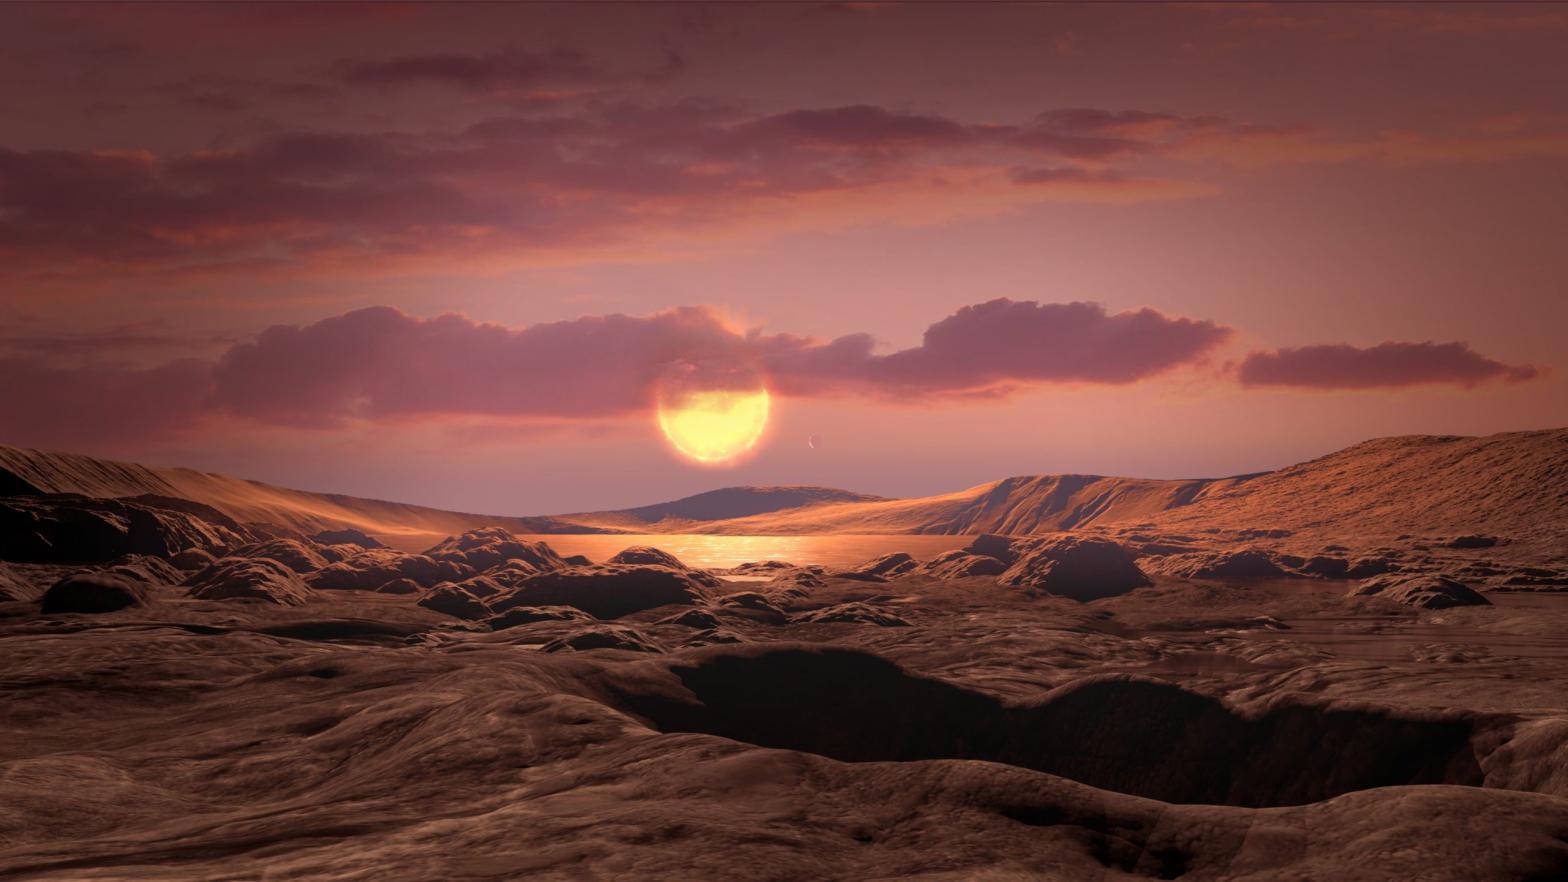 Artist's impression of the surface of exoplanet Kepler-1649c. (Image: NASA/Ames Research Centre/Daniel Rutter)